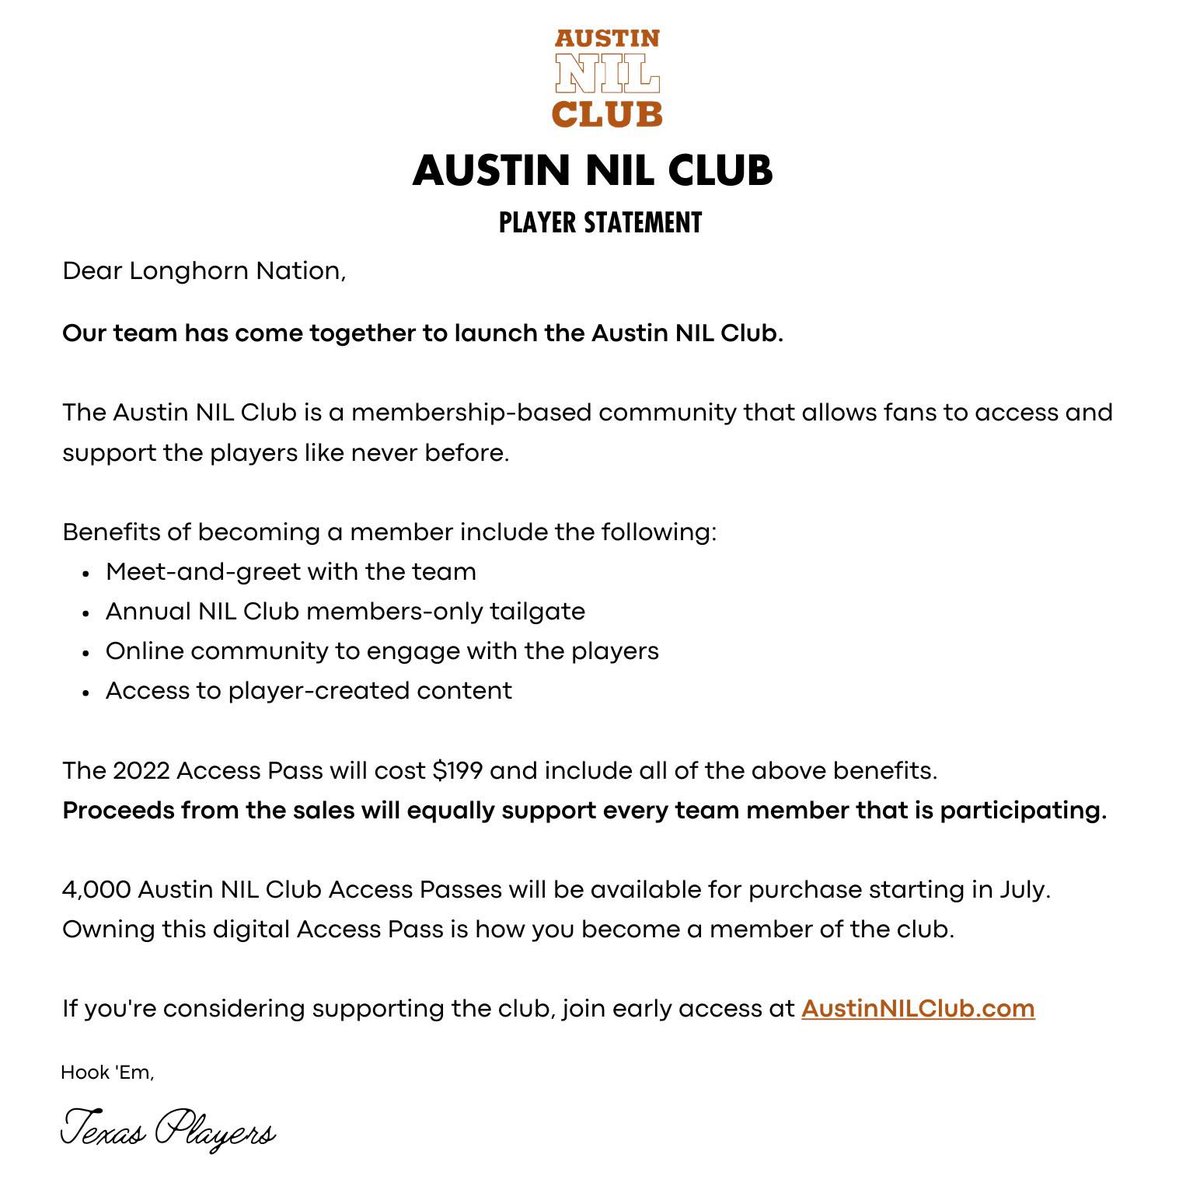 To all our fans, let’s do something special 🤘 @AustinNILClub #HookEm